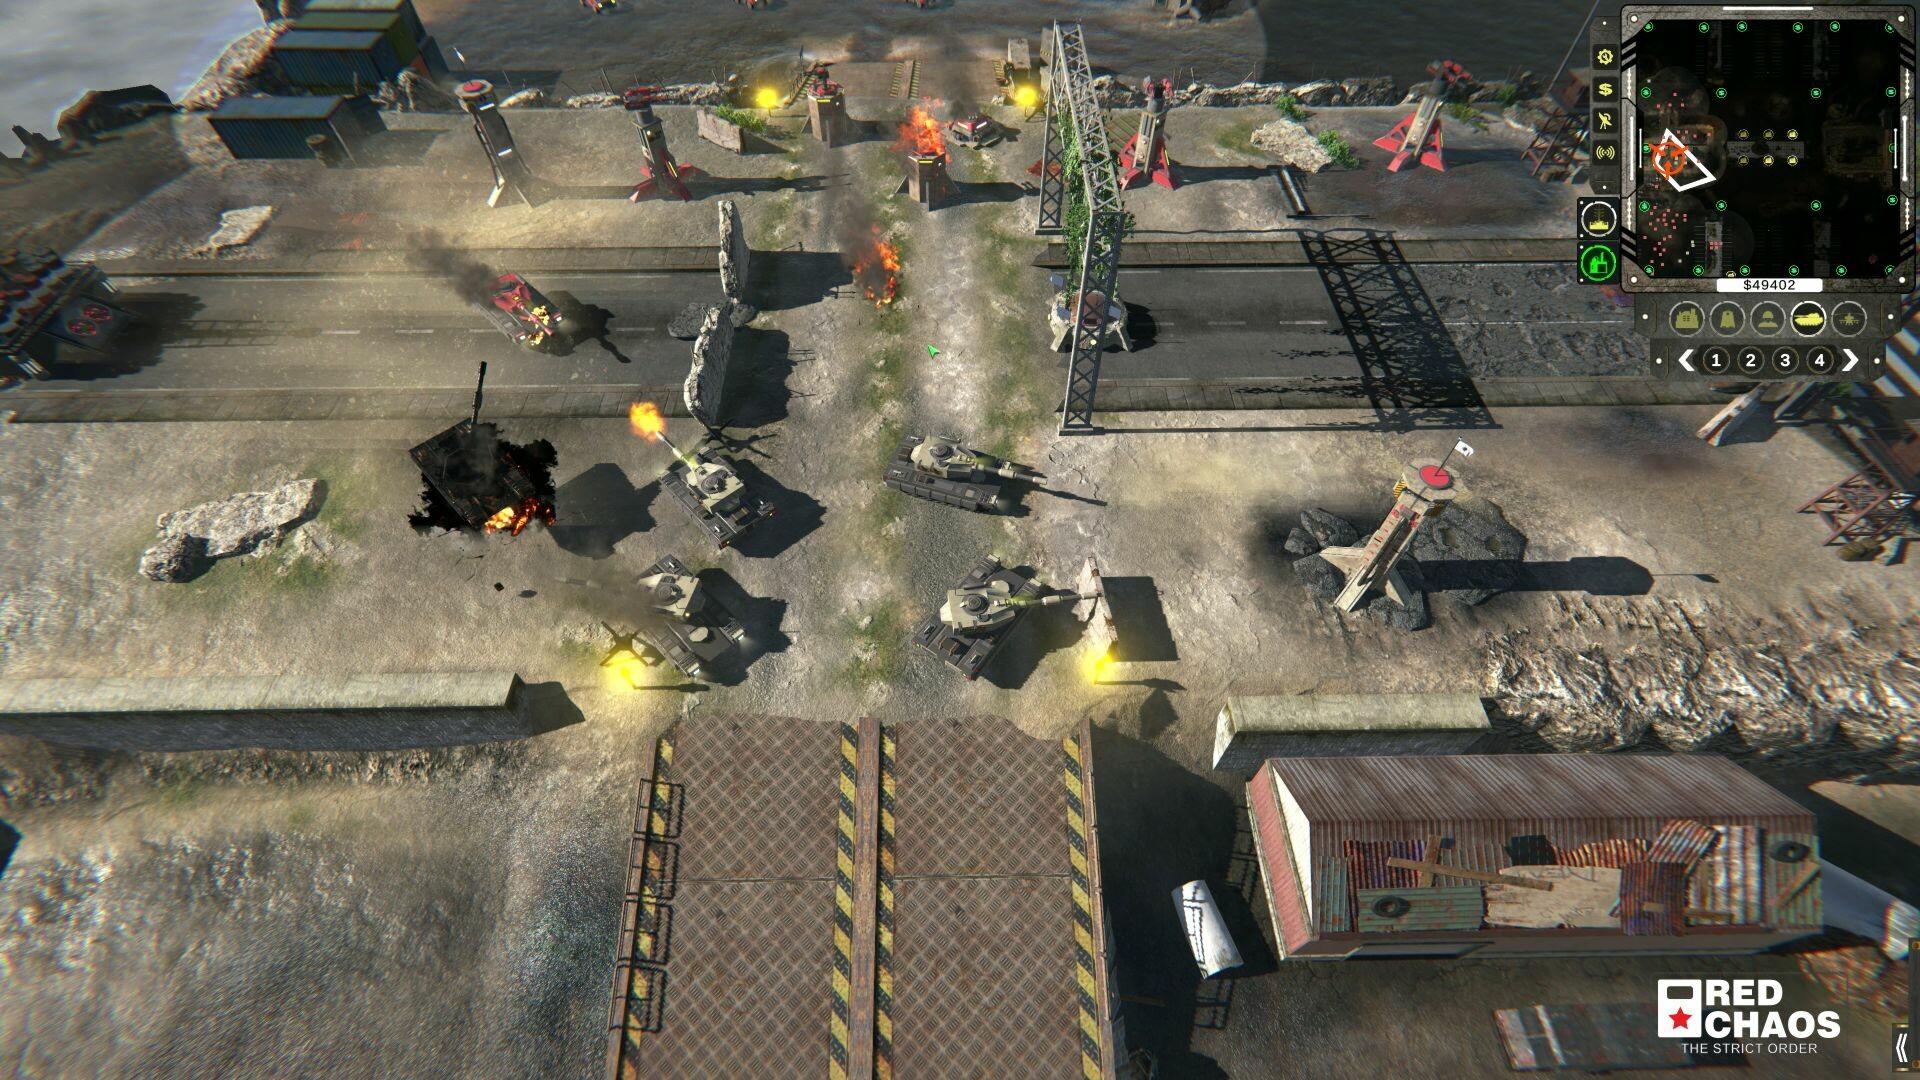 Red Chaos - The Strict Order ภาพหน้าจอเกม